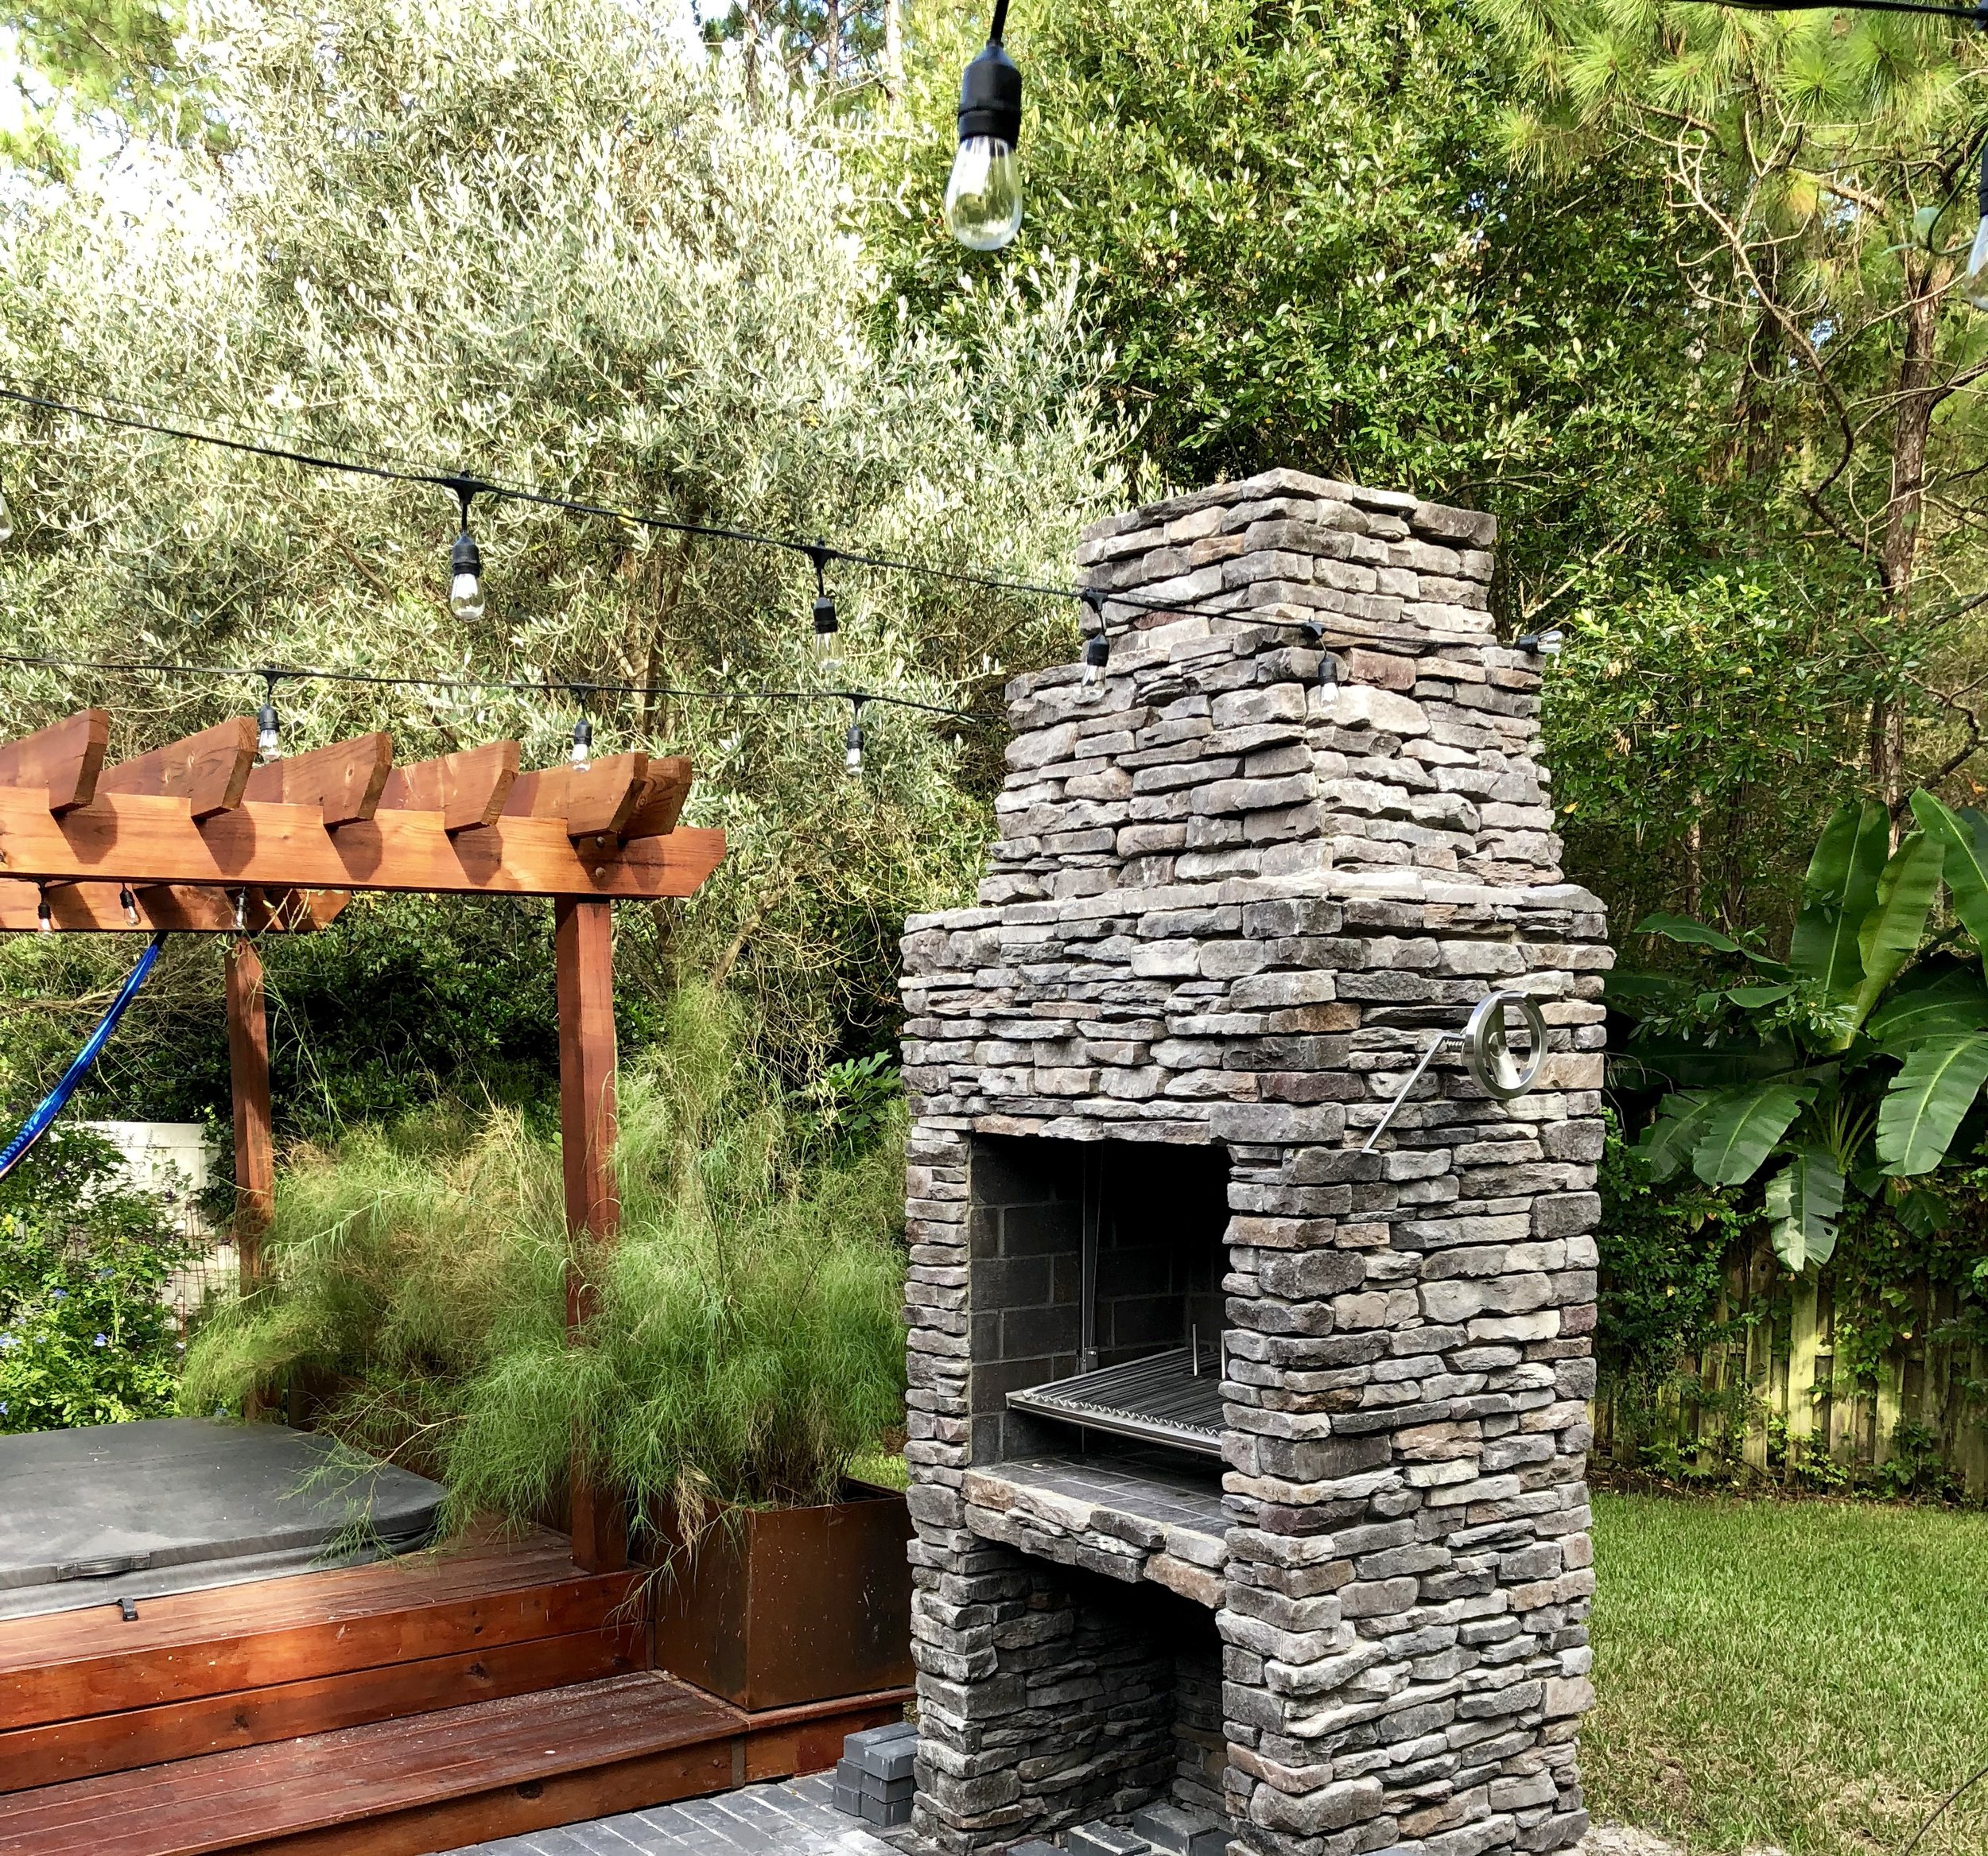 Urban Asado Fireplace style grill systems